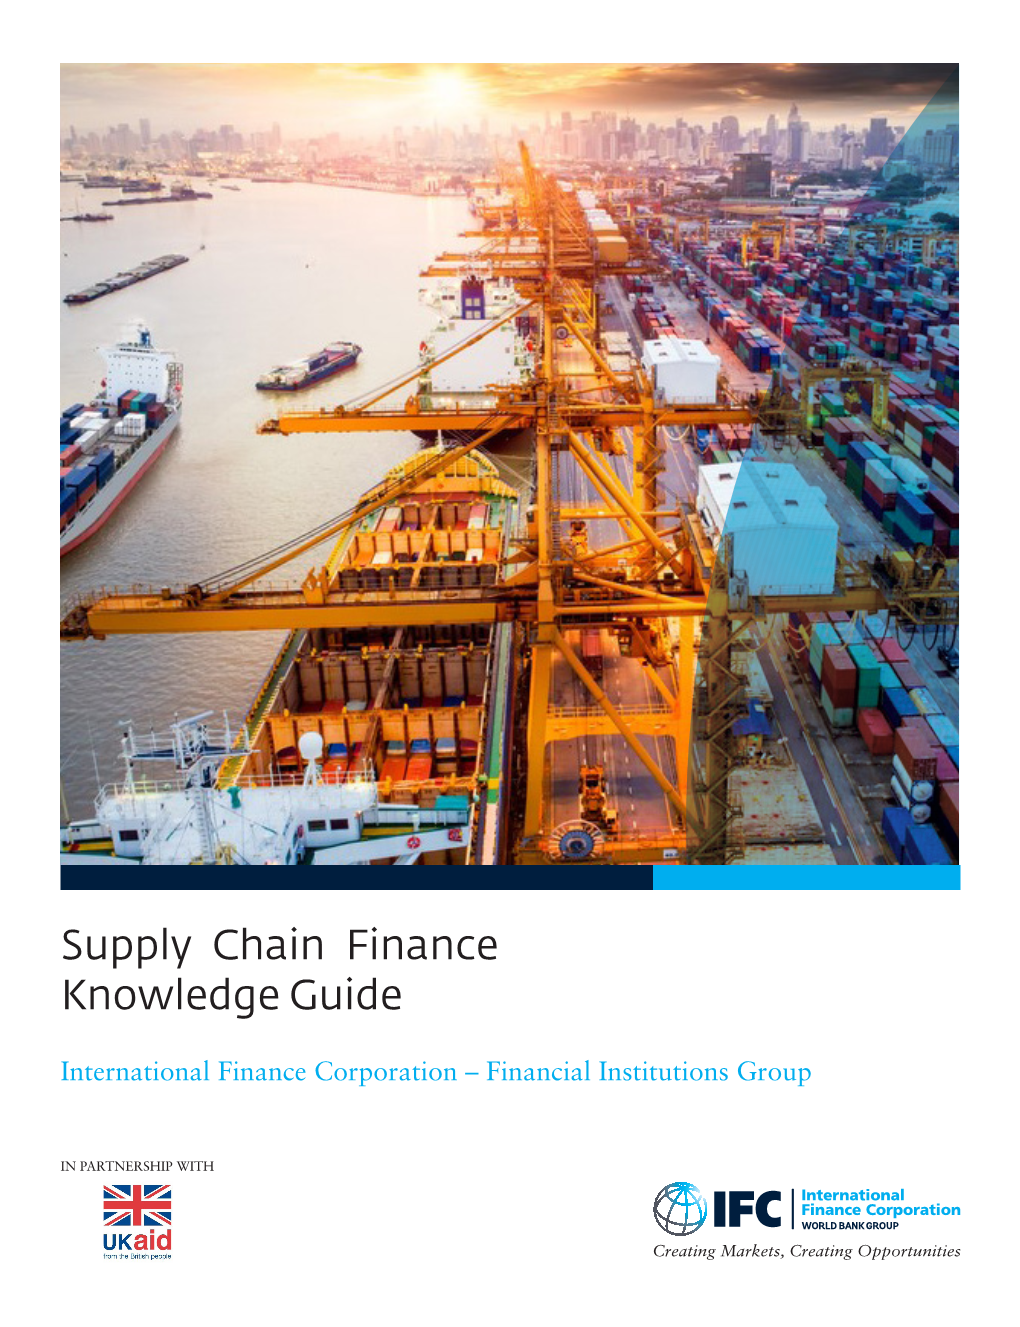 Supply Chain Finance Knowledge Guide